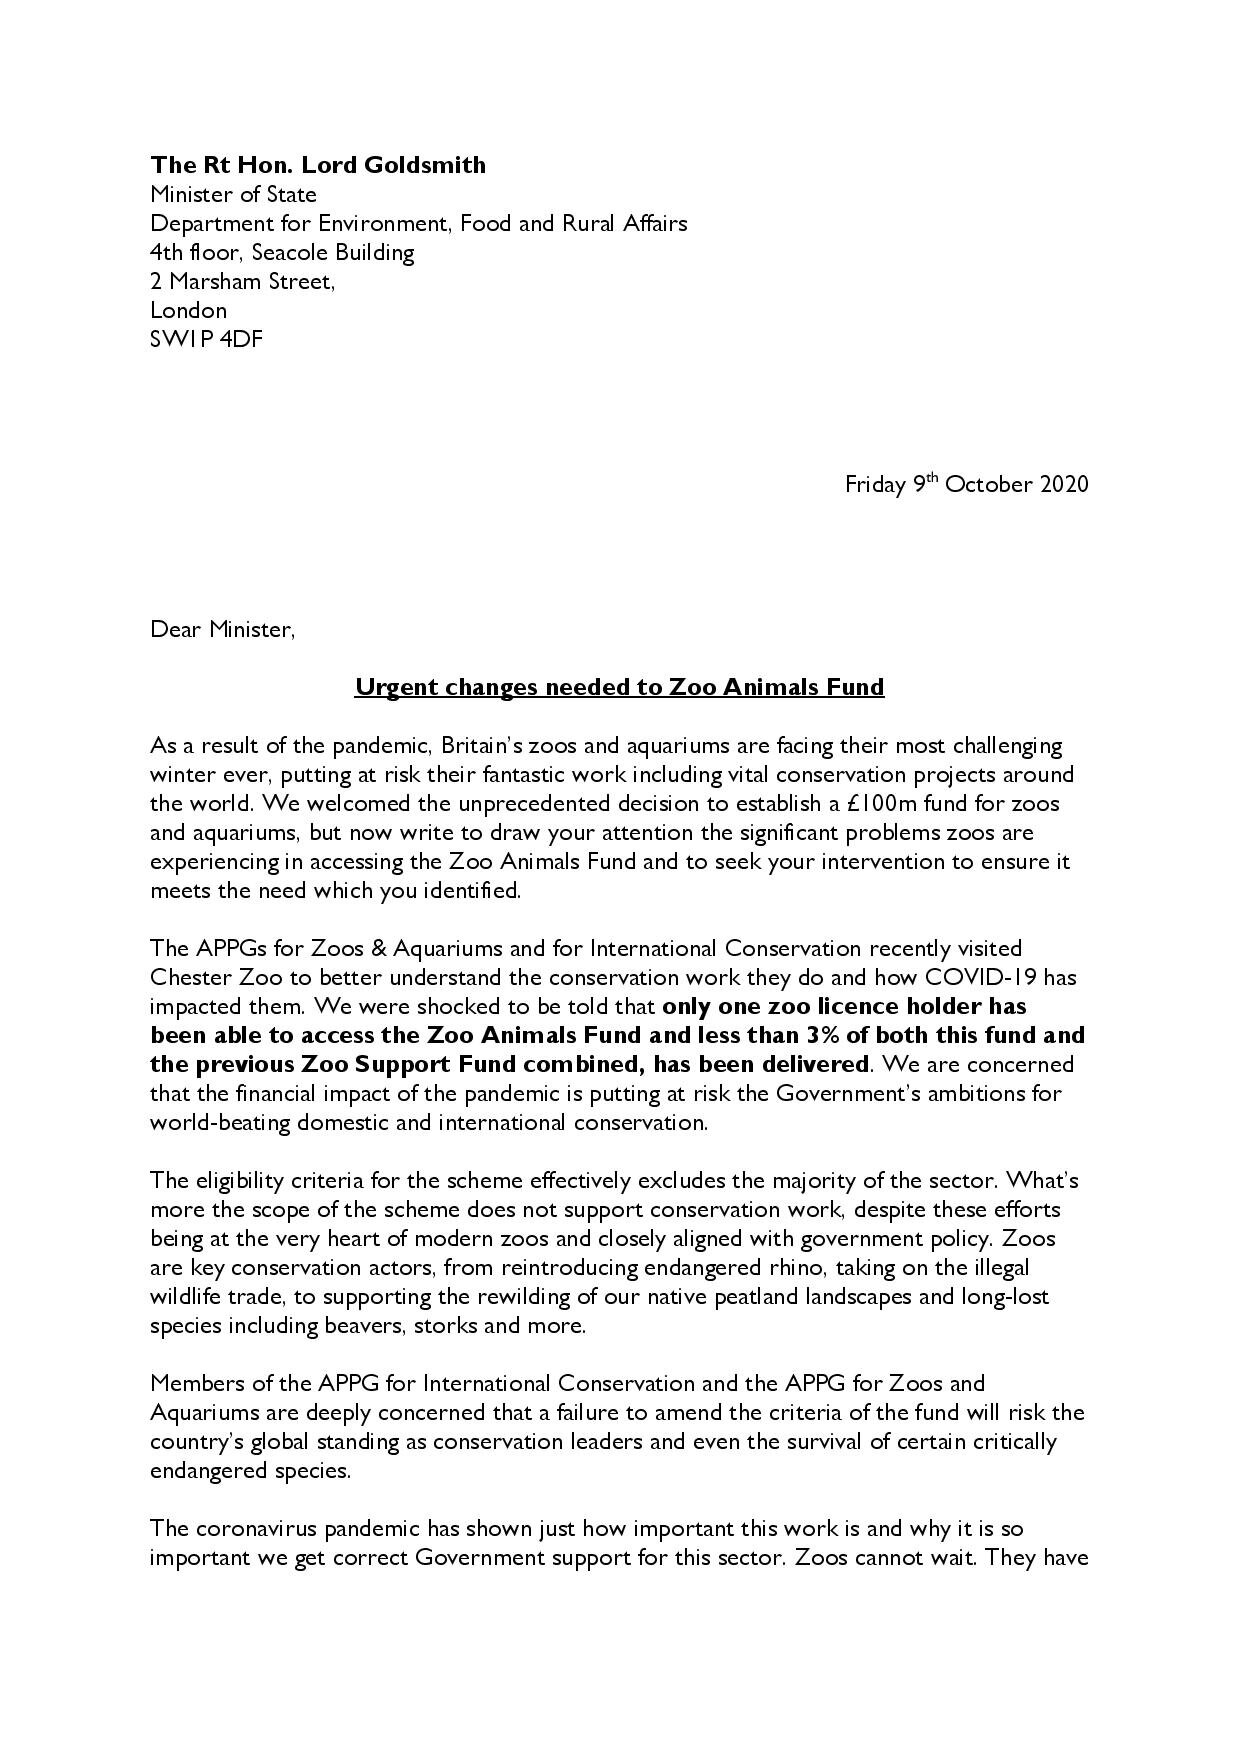 201007 Joint APPG letter_Zoos Aquariums_International Conservation FINAL APPROVED-page-001.jpg